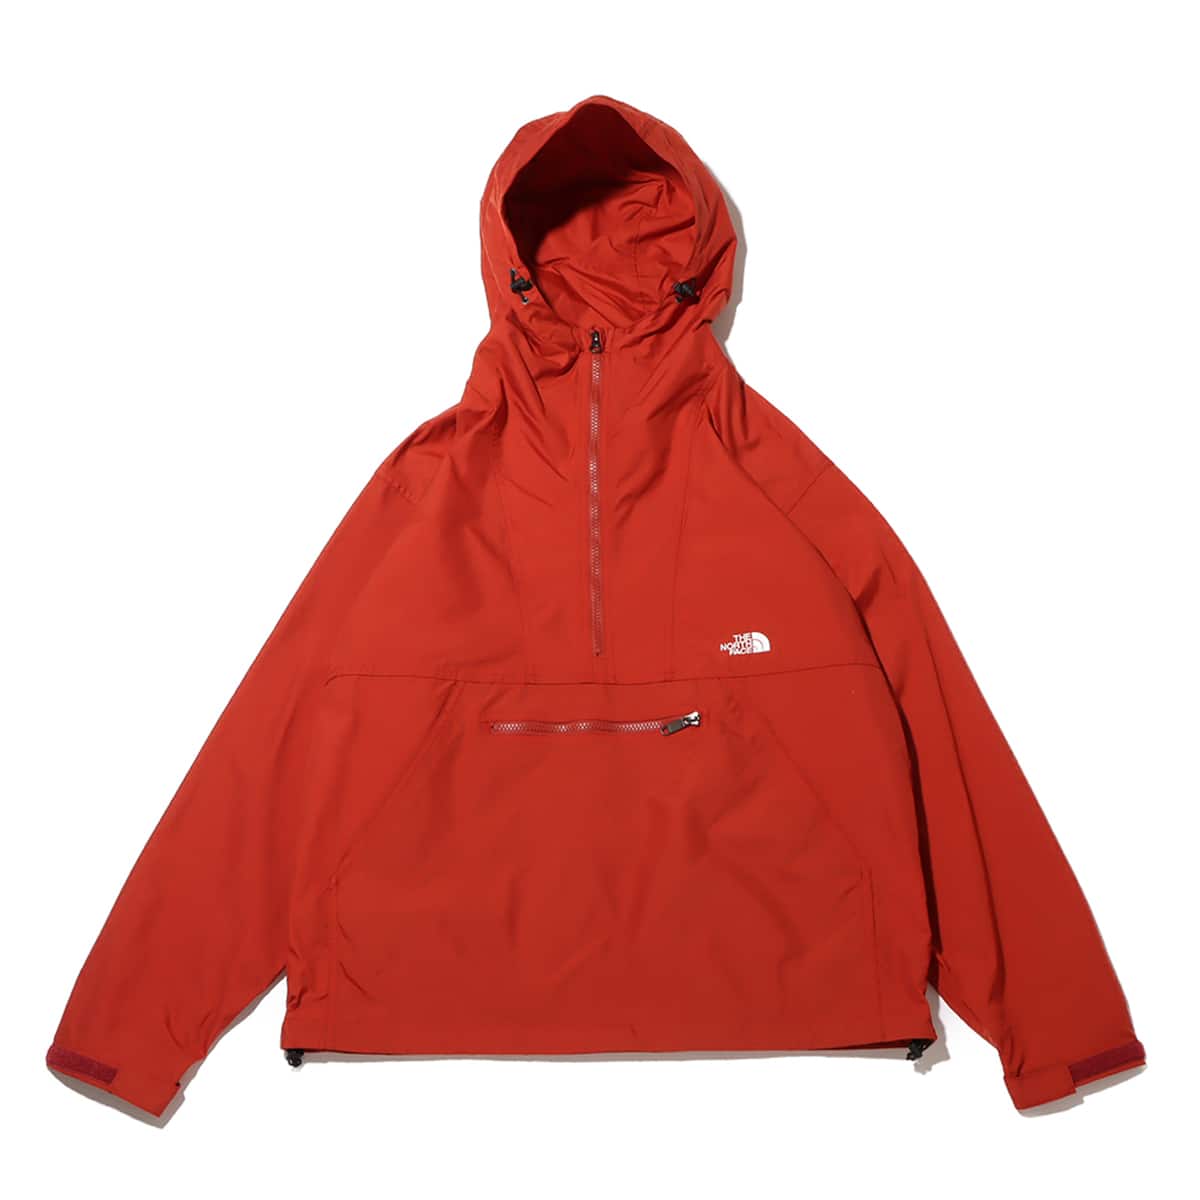 THE NORTH FACE Compact Anorak アイアンレッド 24SS-I